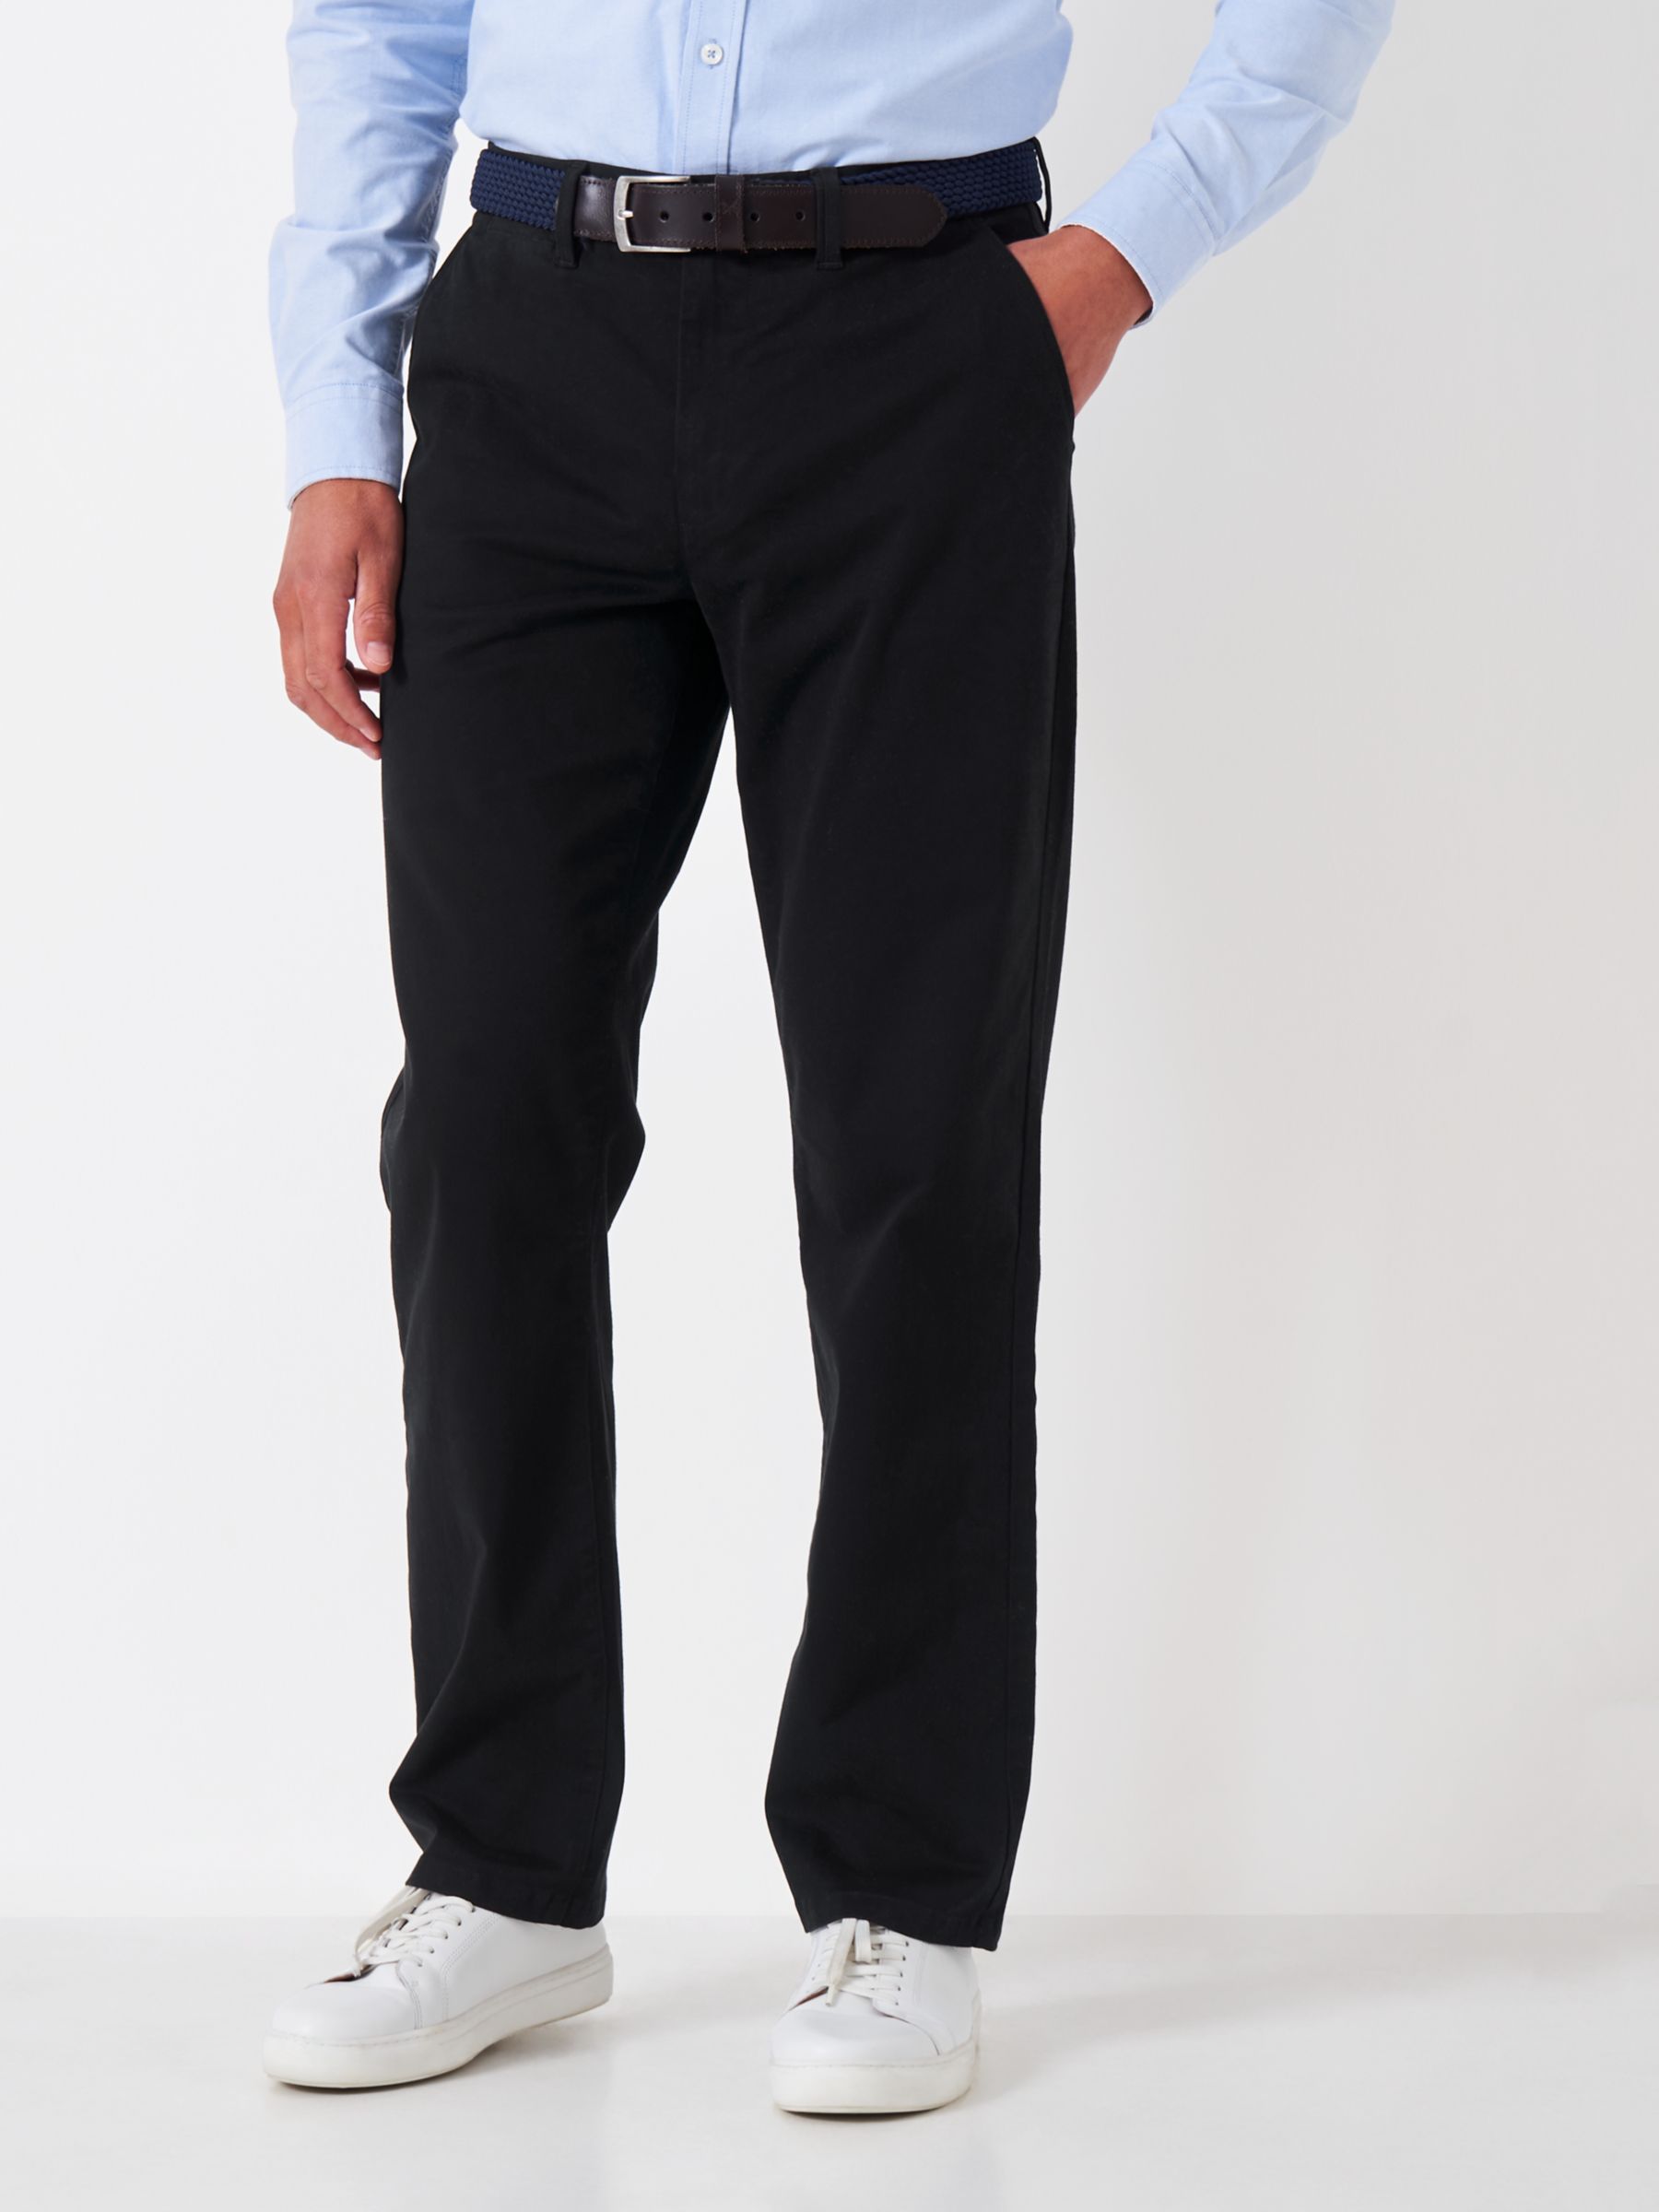 Crew Clothing Straight Fit Chinos, Black at John Lewis & Partners